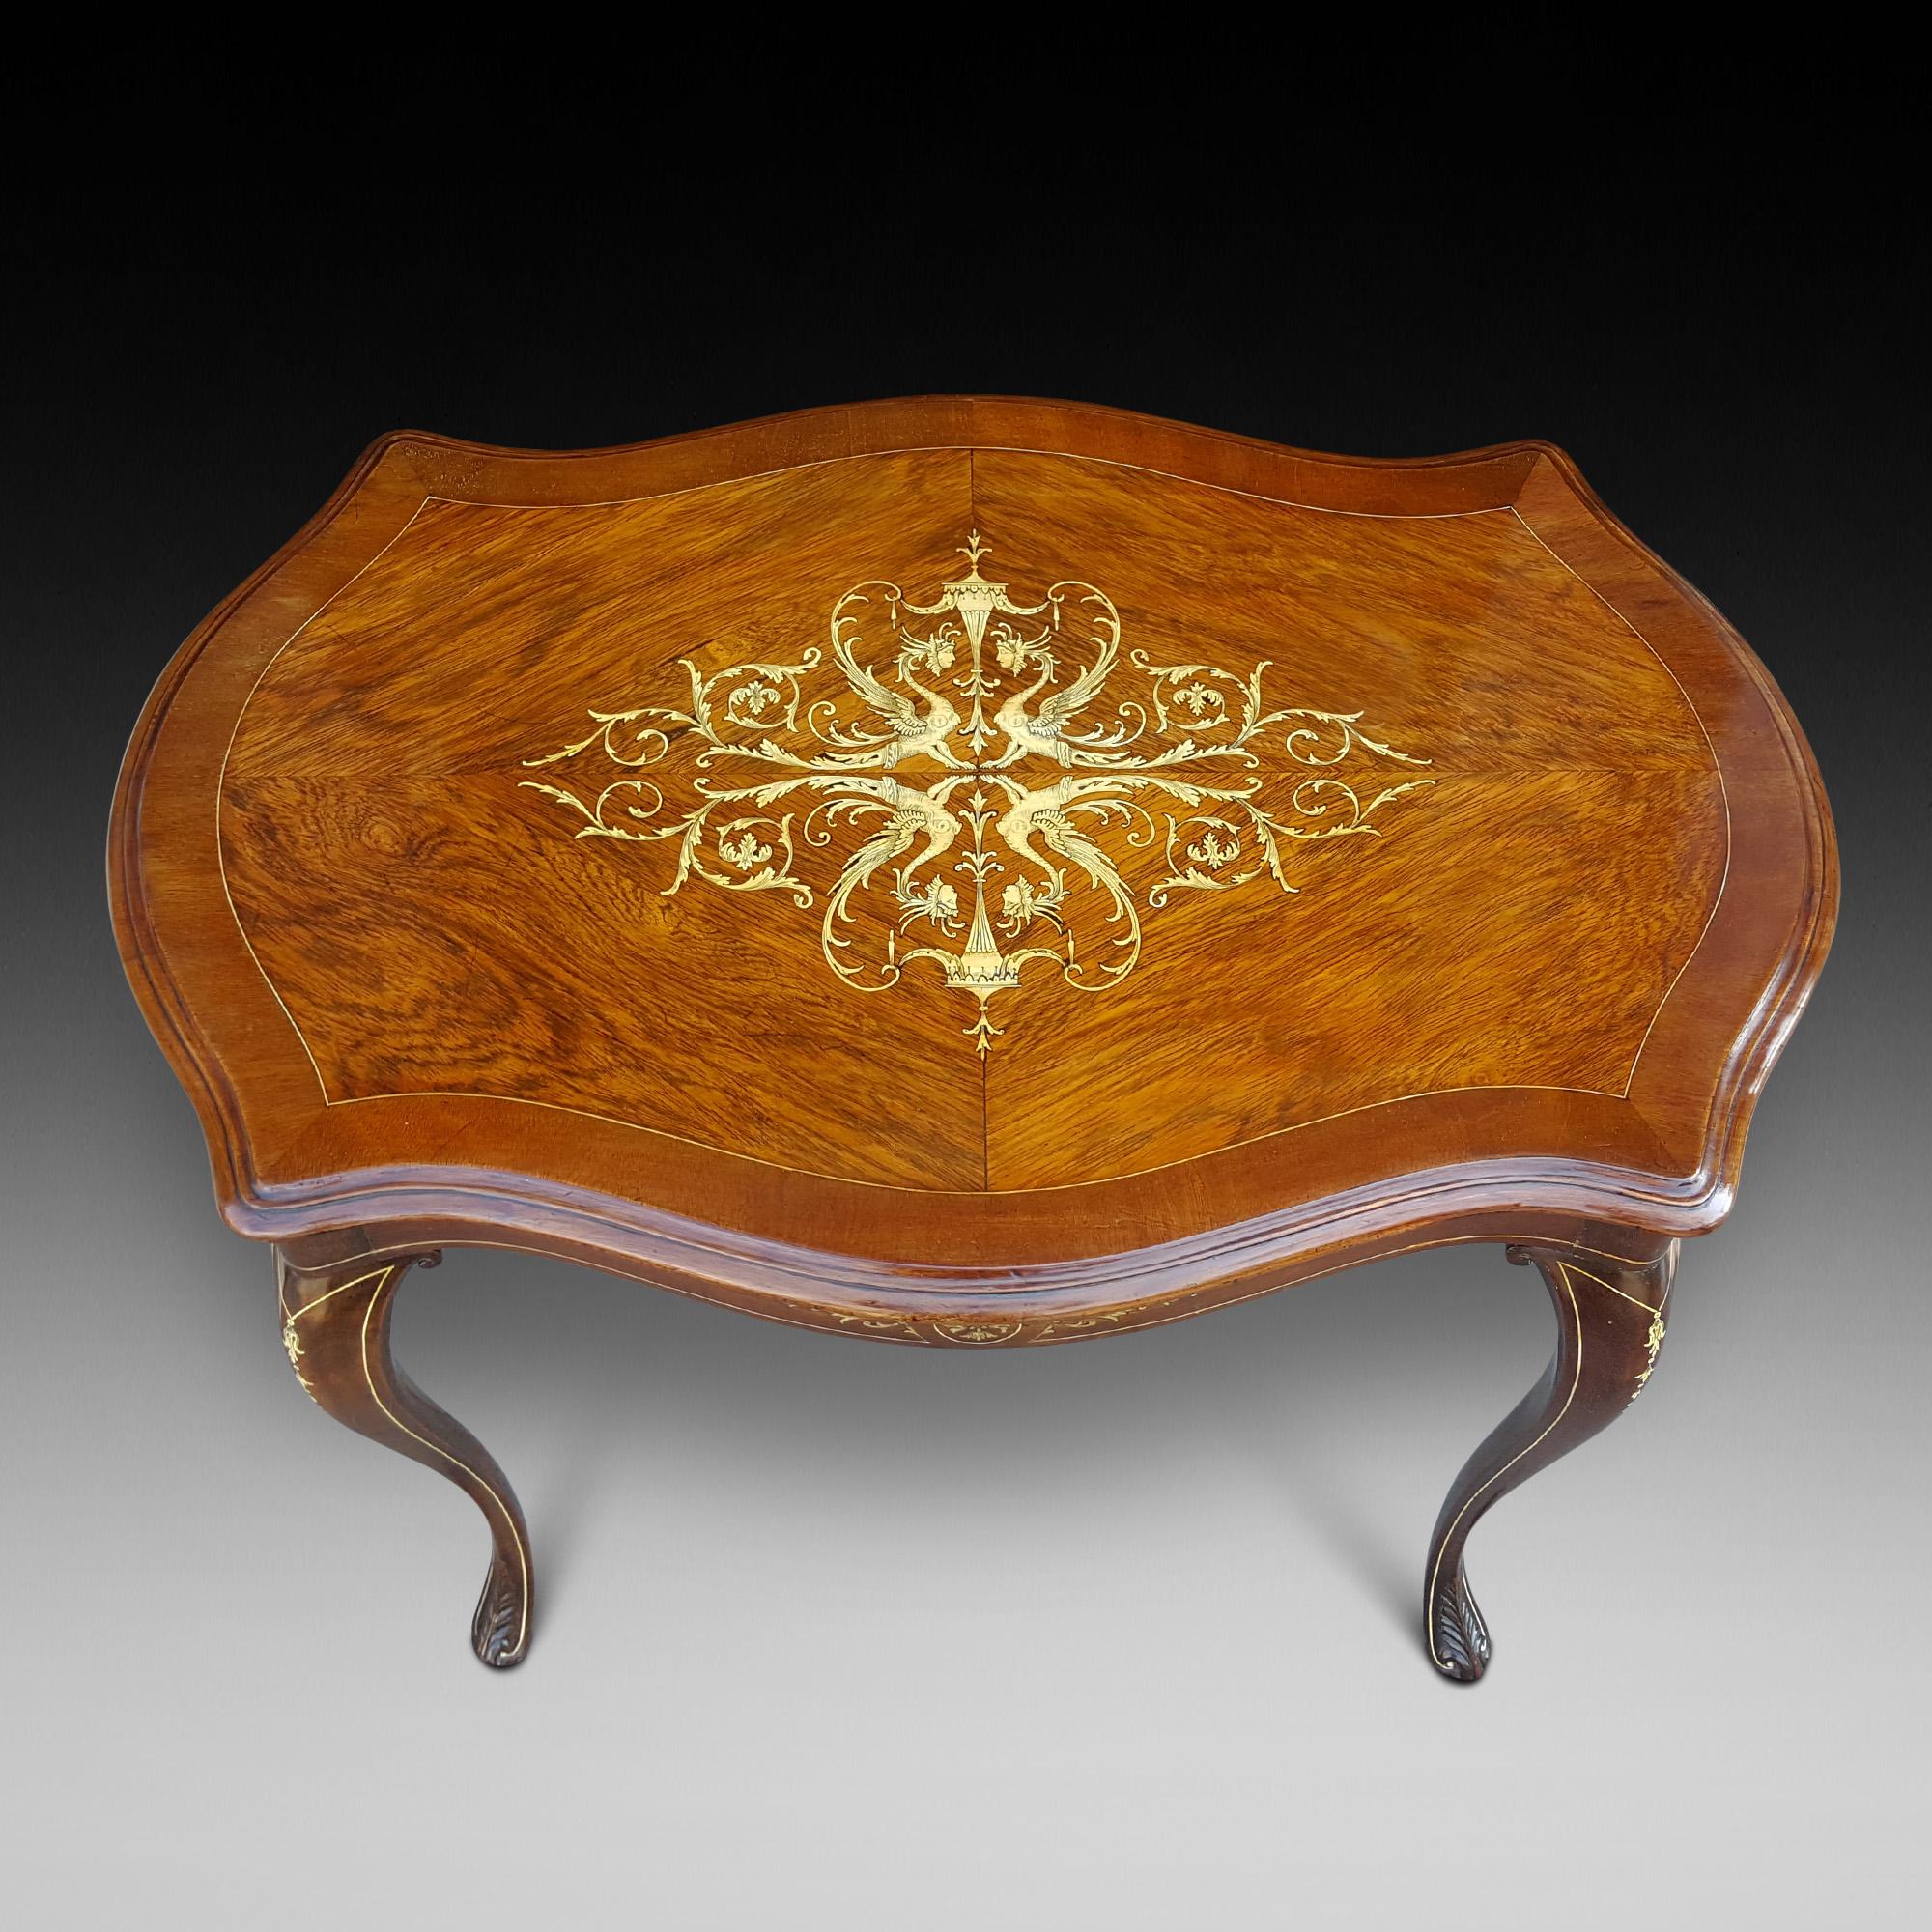 English Edwardian Rosewood and Bone Inlaid Occasional Table